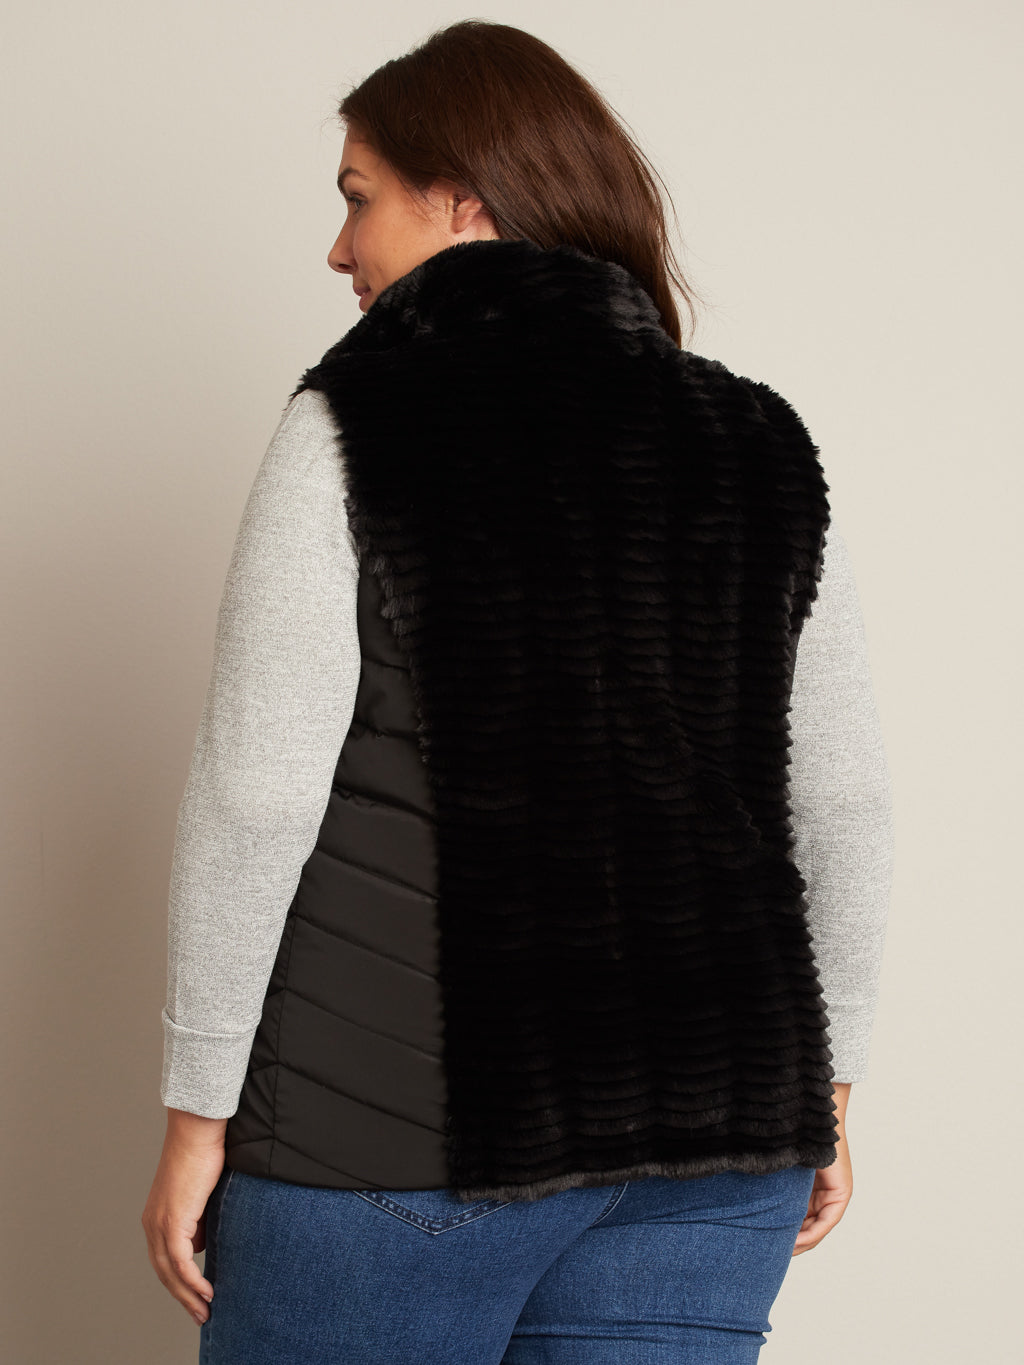 Sleeveless puffer jacket with faux-fur